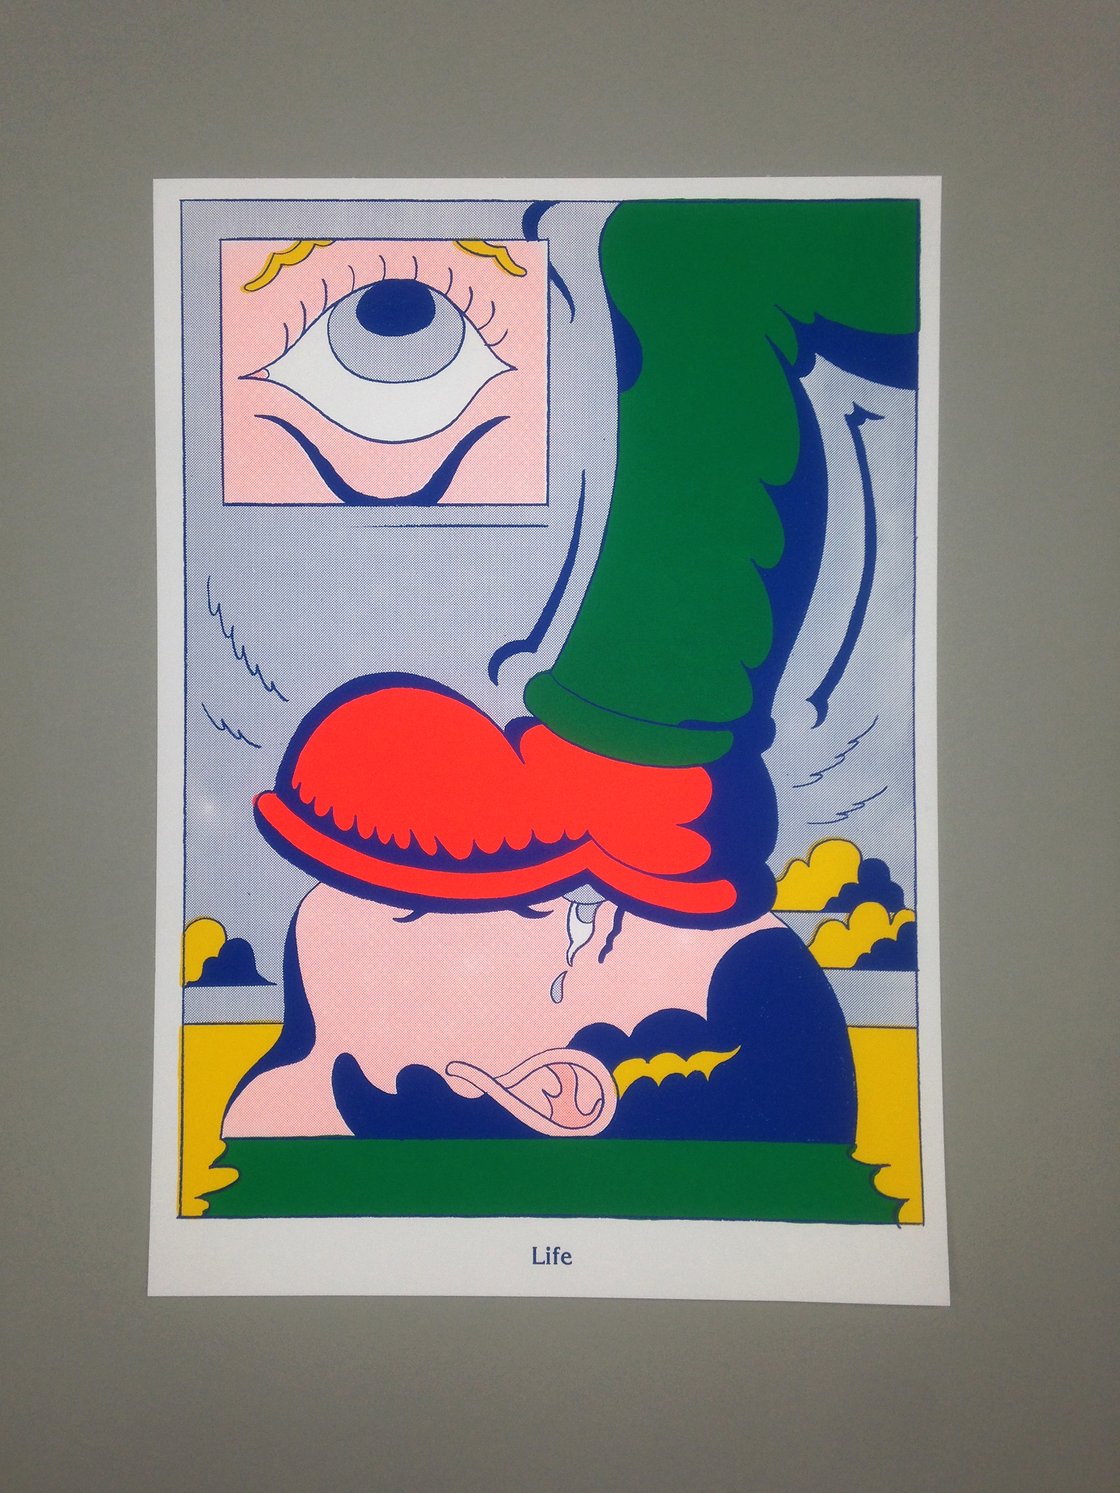 Image of Life (4 color screenprint - Edition of 25)